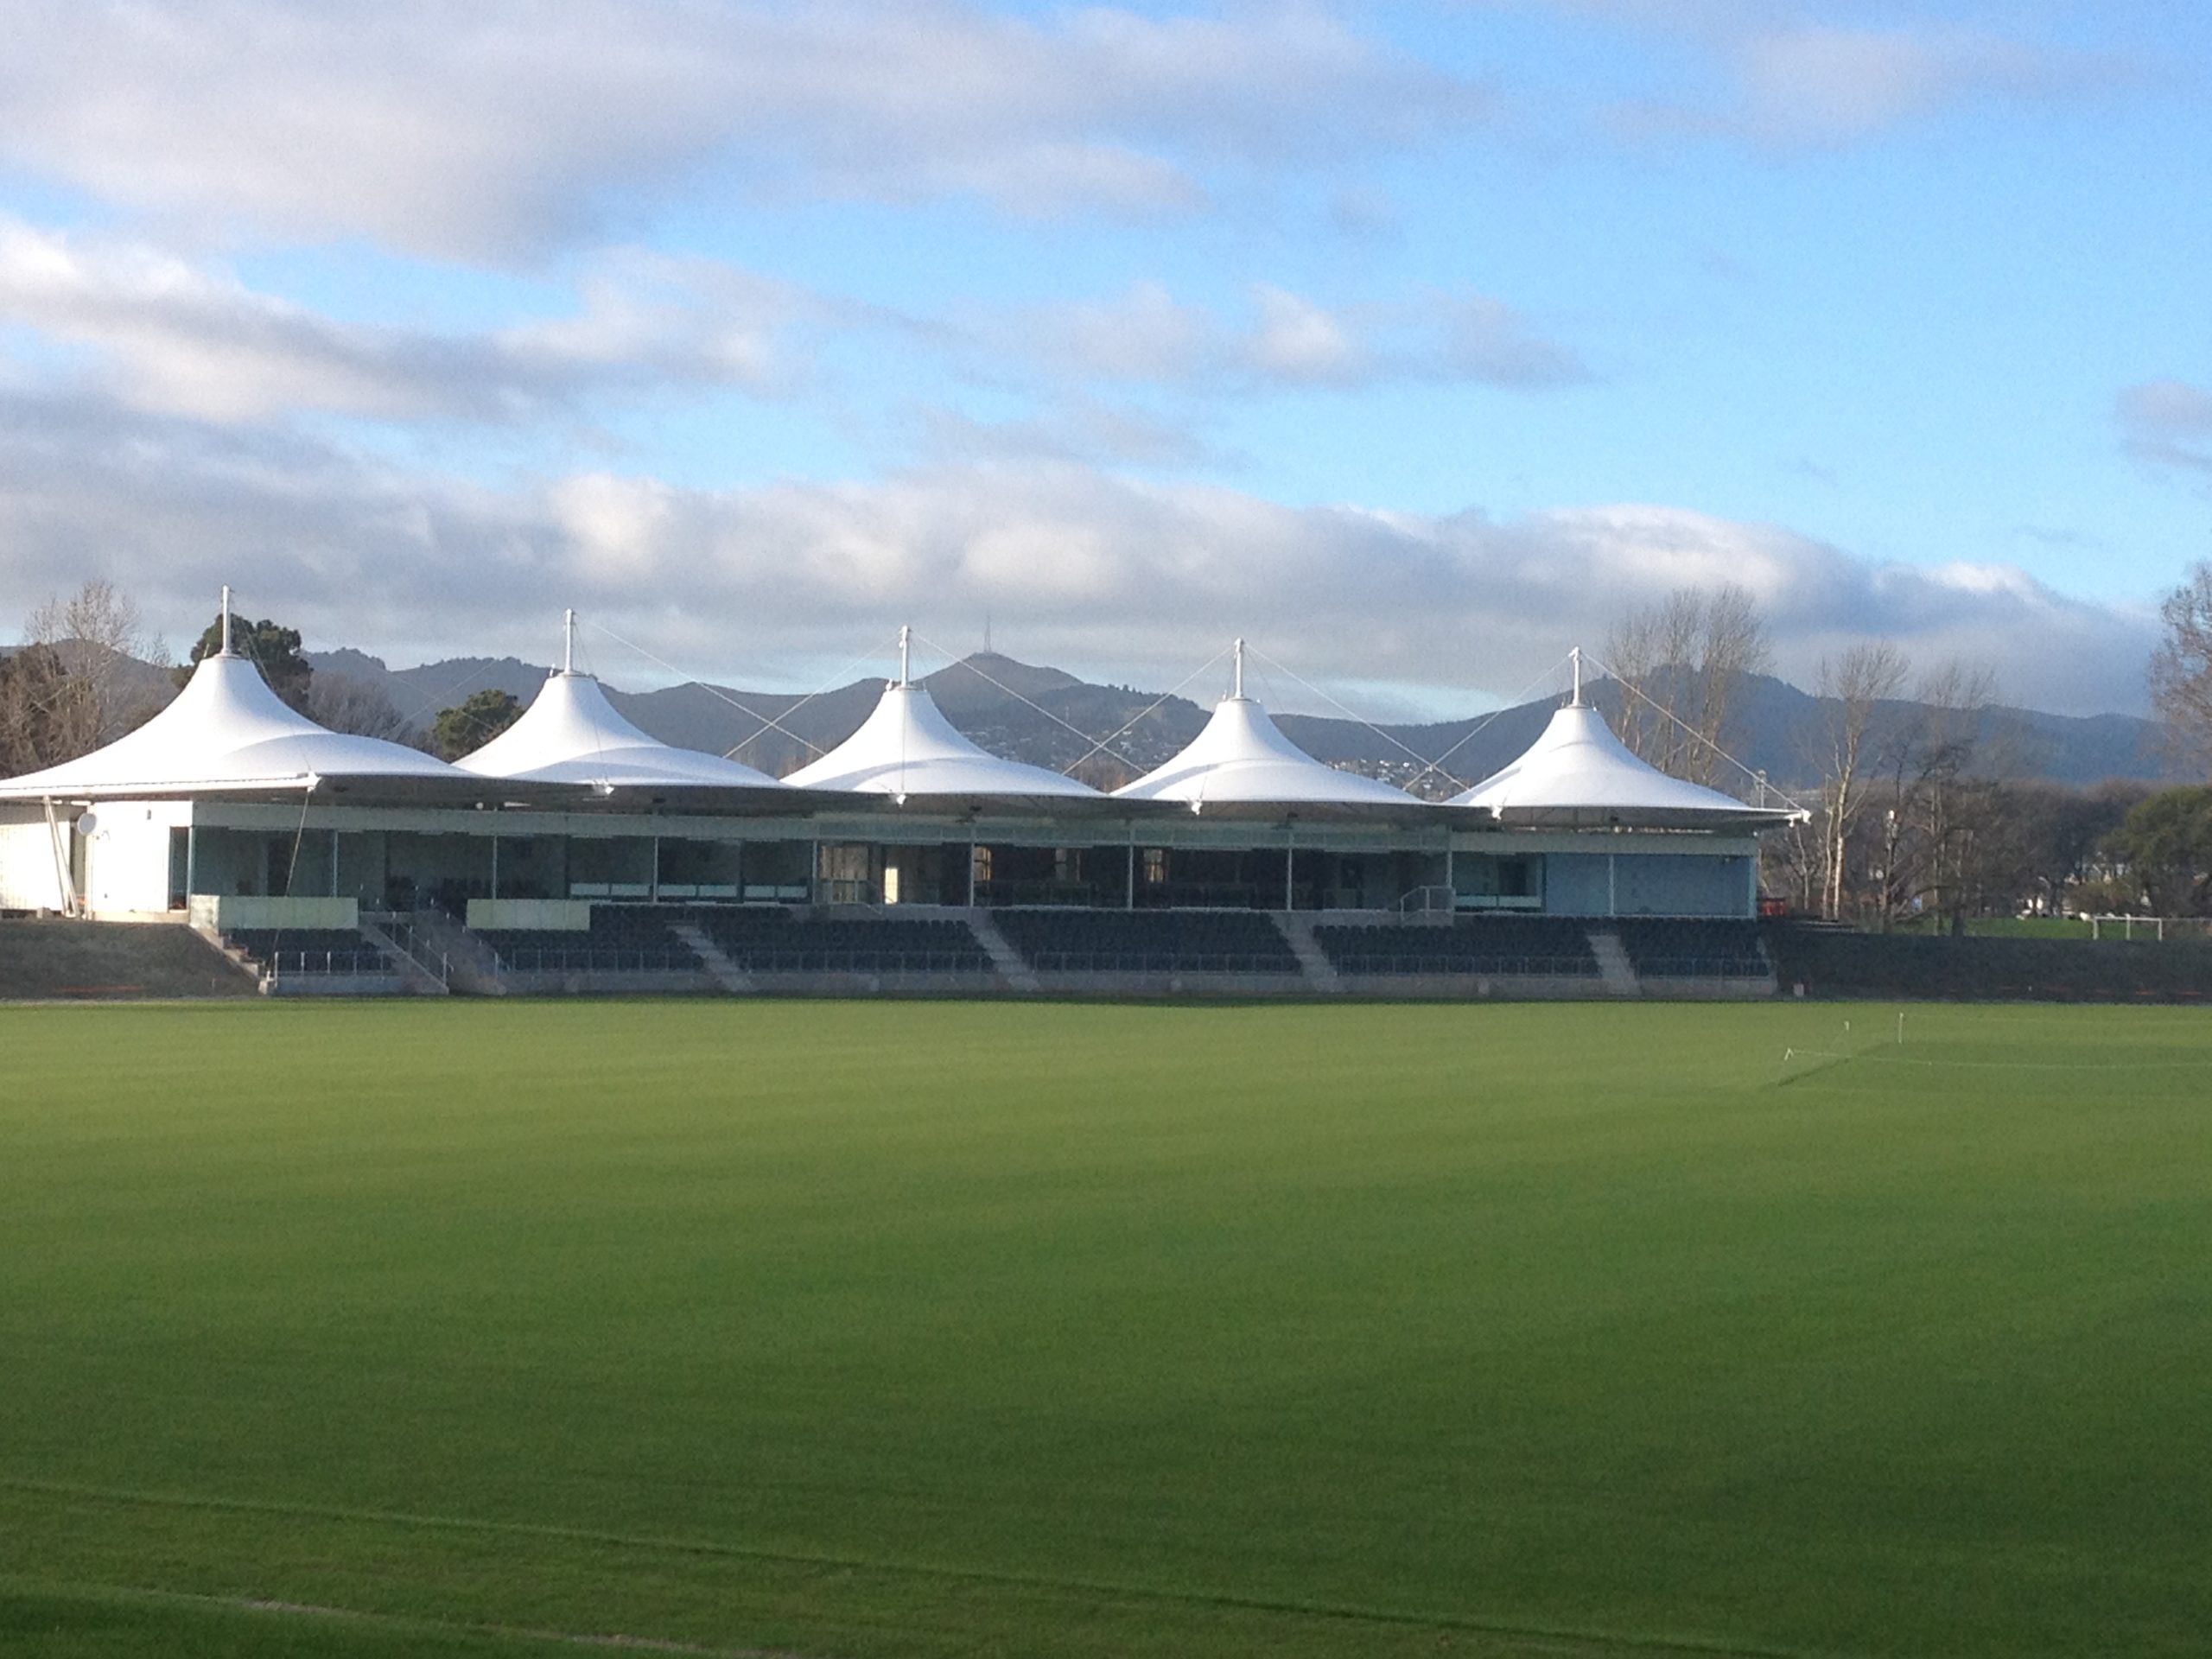 Christchurch celebrates the opening of Hagley Oval Pavilion